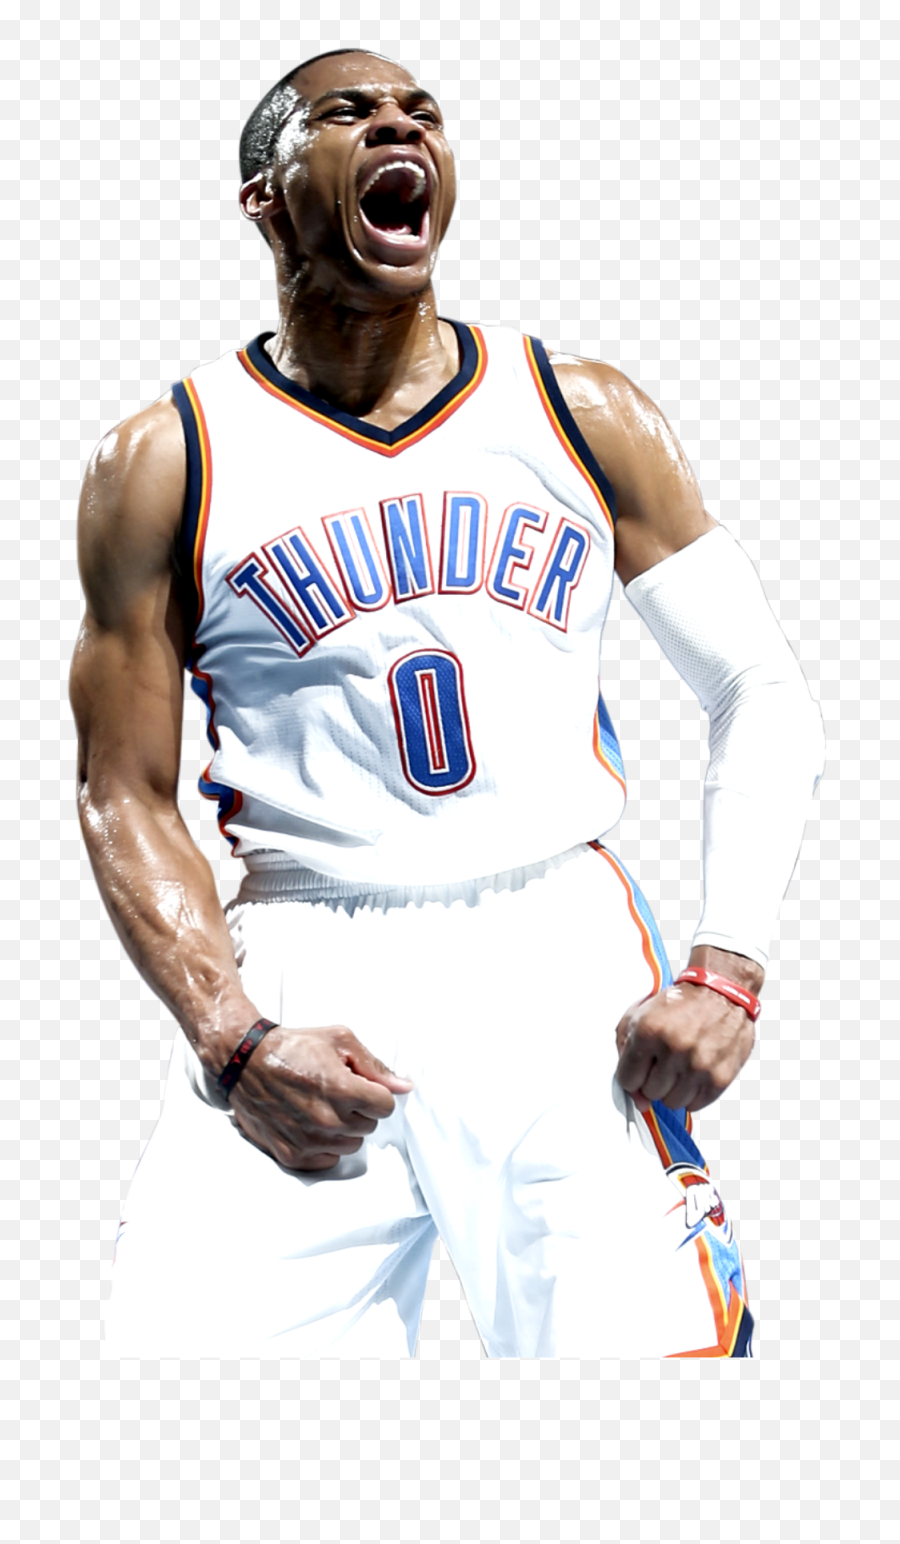 Russell Westbrook Cut Out Png Image - Russell Westbrook Transparent Background,Westbrook Png